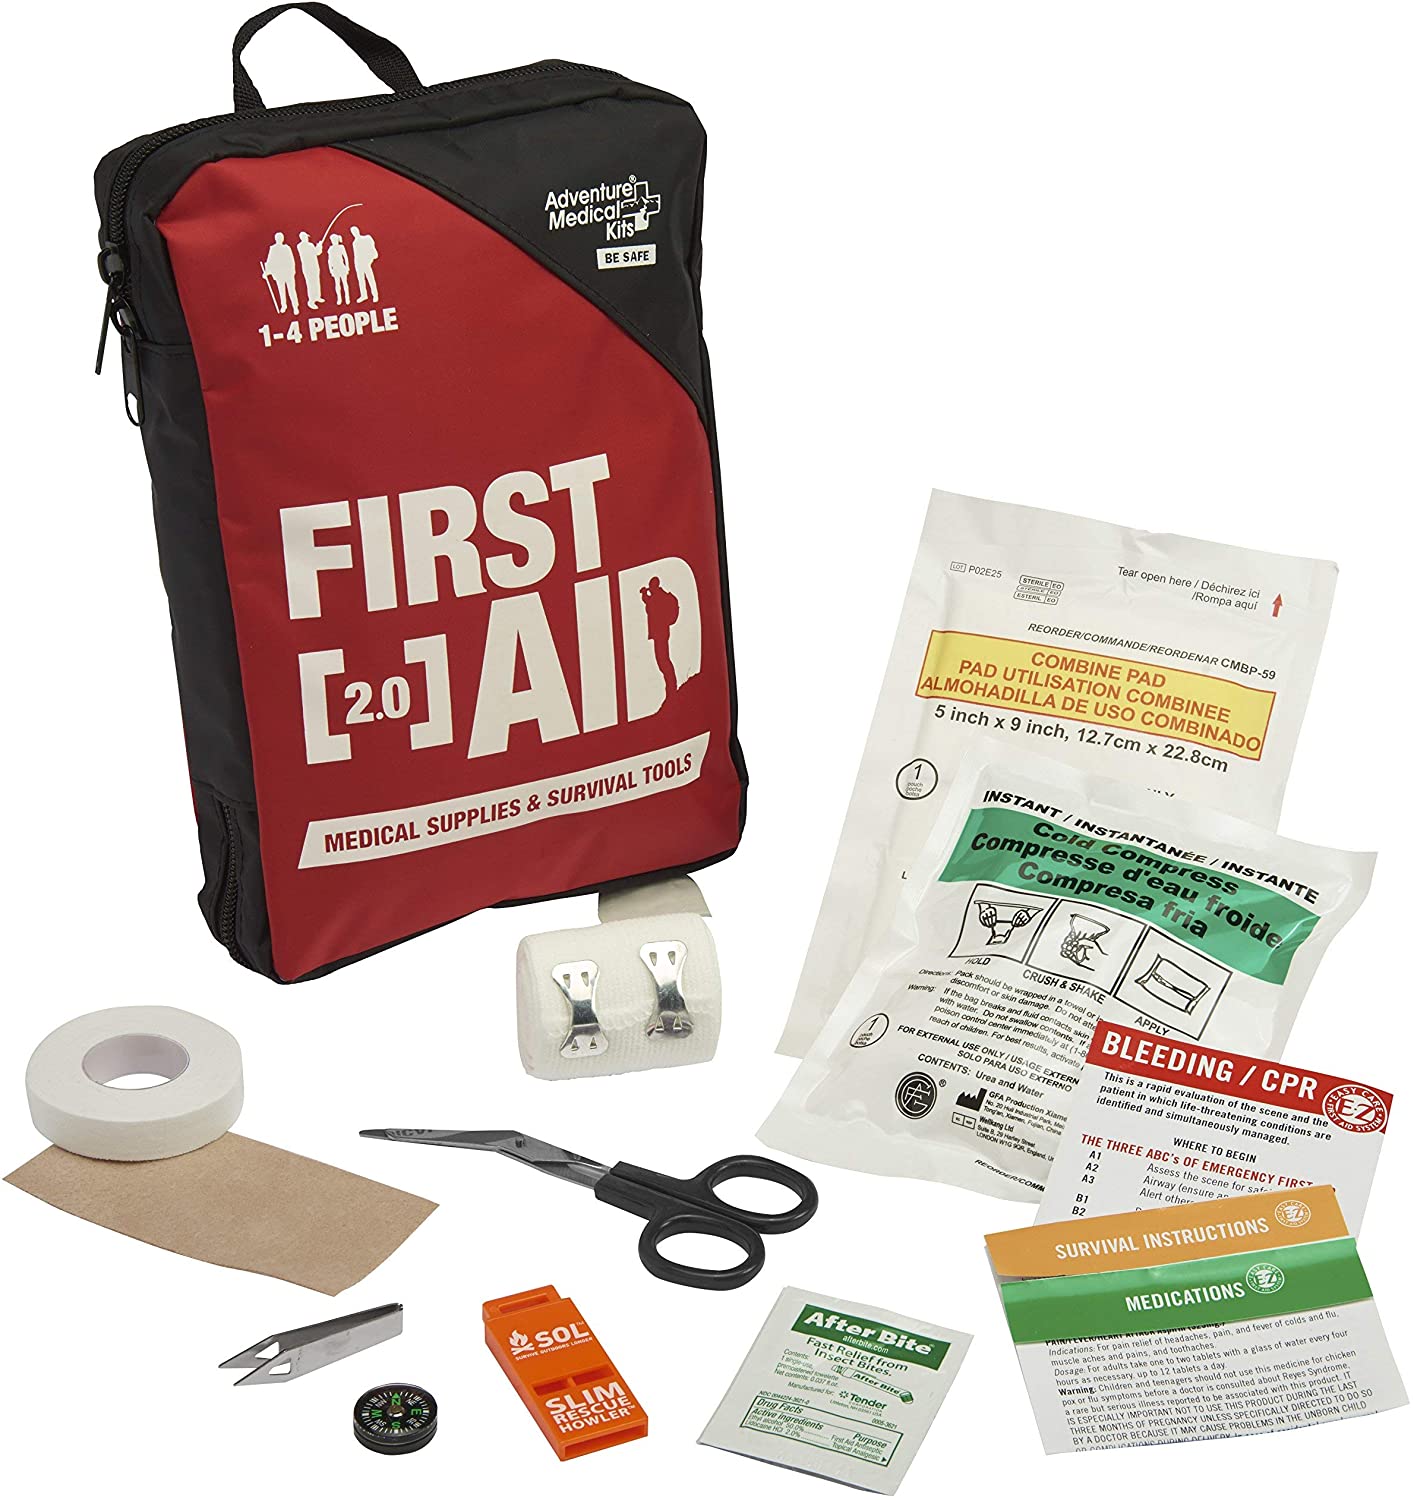 Adventure Medical Kits Adventure First Aid 2.0 First Aid Kit, Easy Care, Survival Items, Active Families, First Aid Essentials, Durable Case, Fully Stocked, 1lb 1oz - image 5 of 7